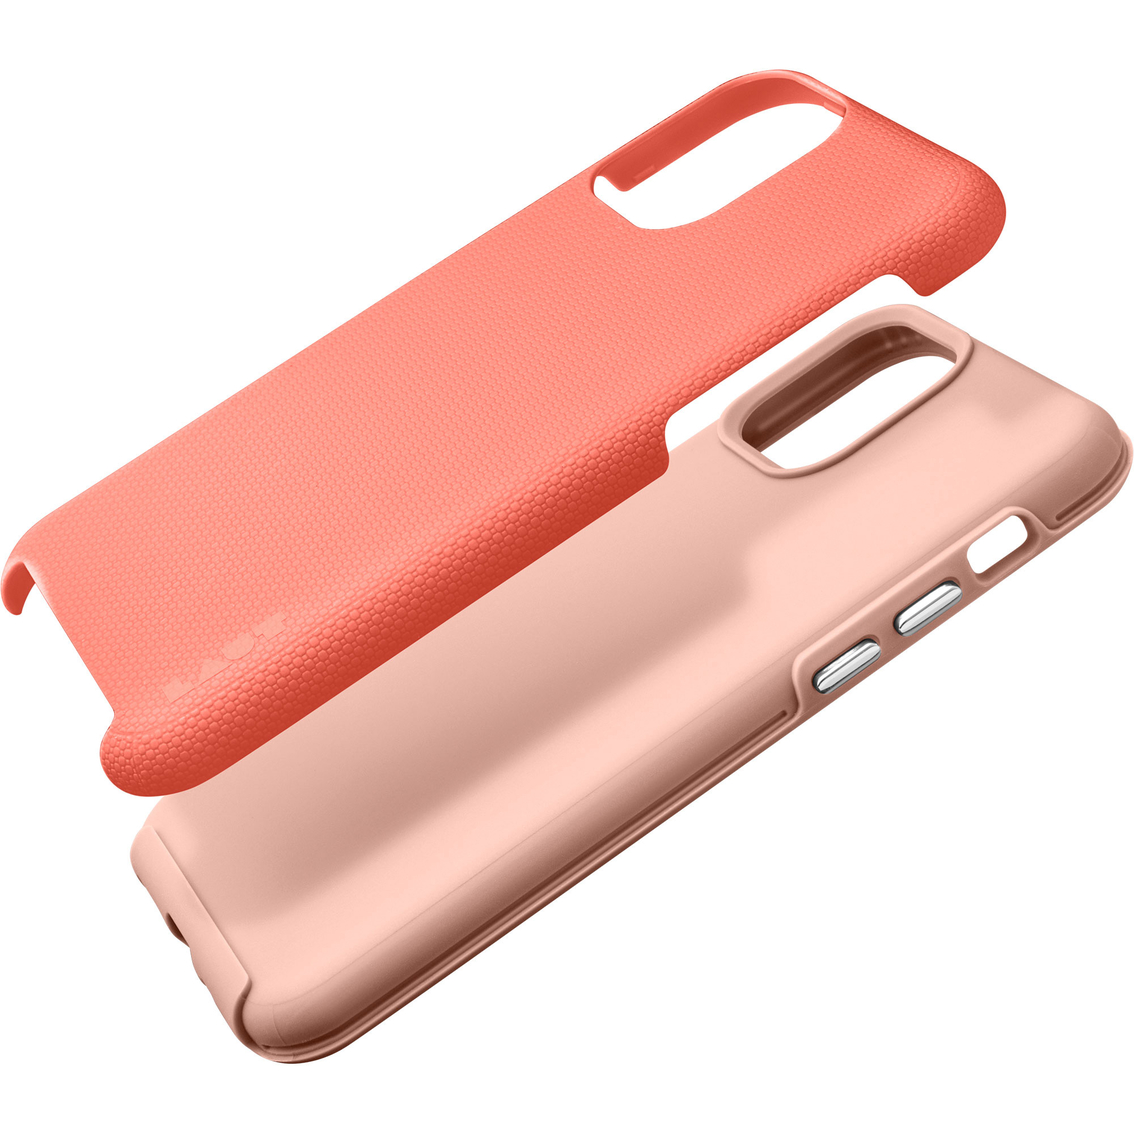 LAUT Design USA SHIELD Case for iPhone 11 - Image 5 of 5